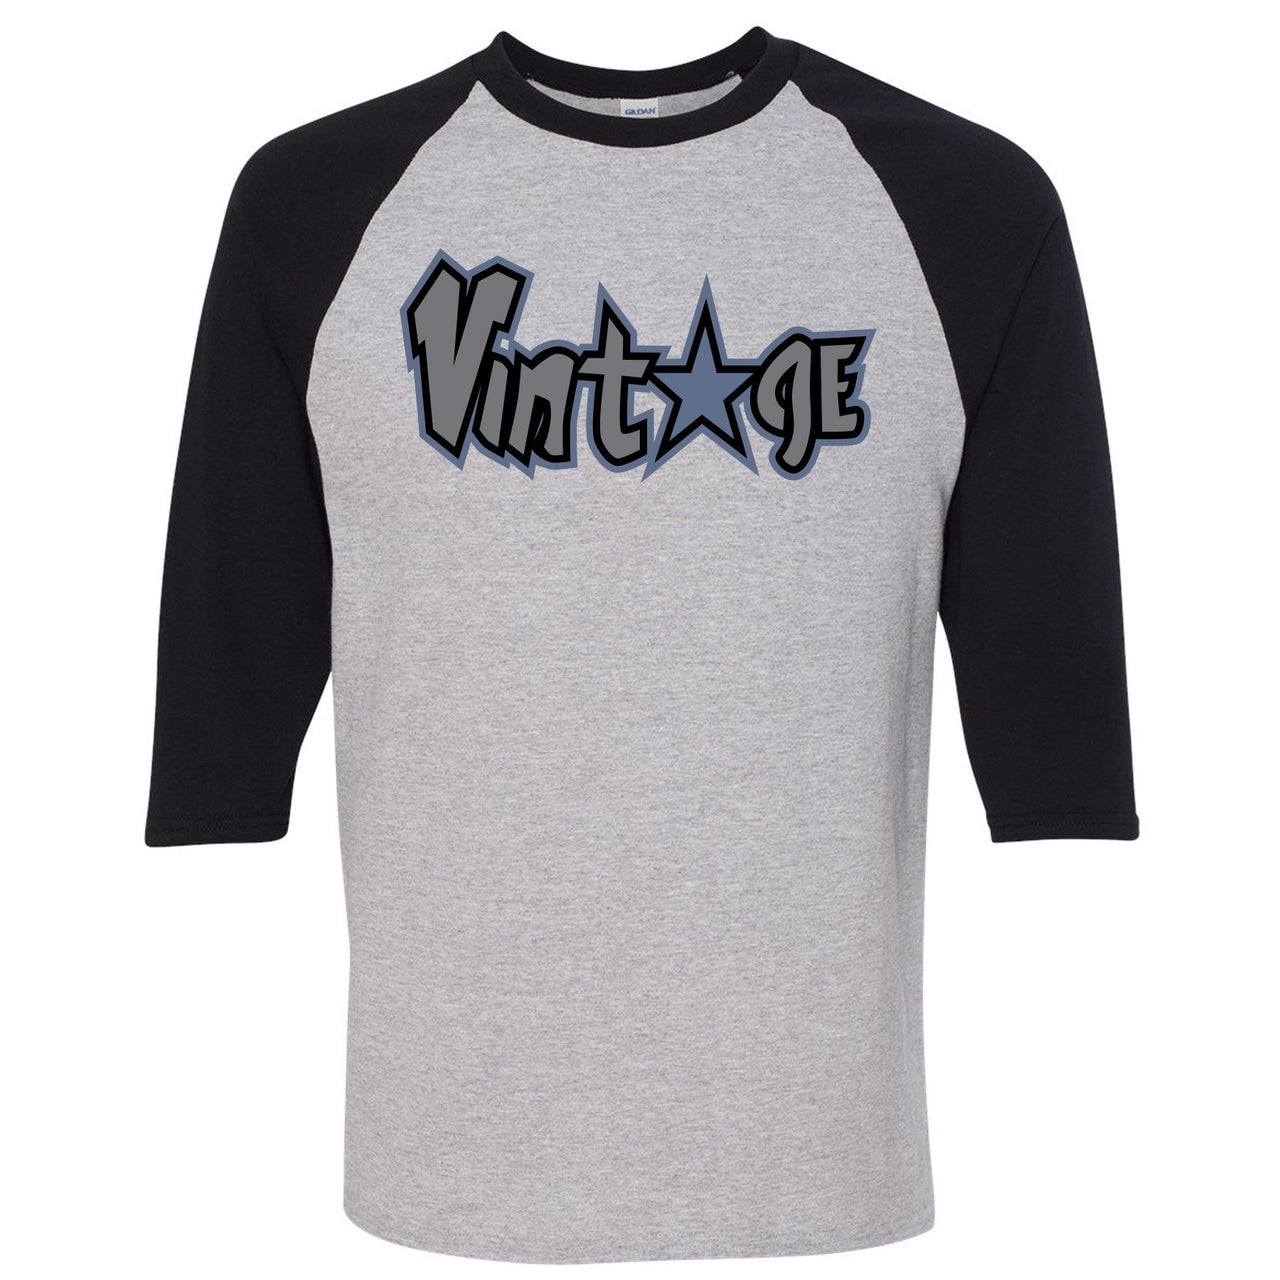 Cap and Gown 13s Raglan T Shirt | Vintage Star Logo, Black and Sports Grey